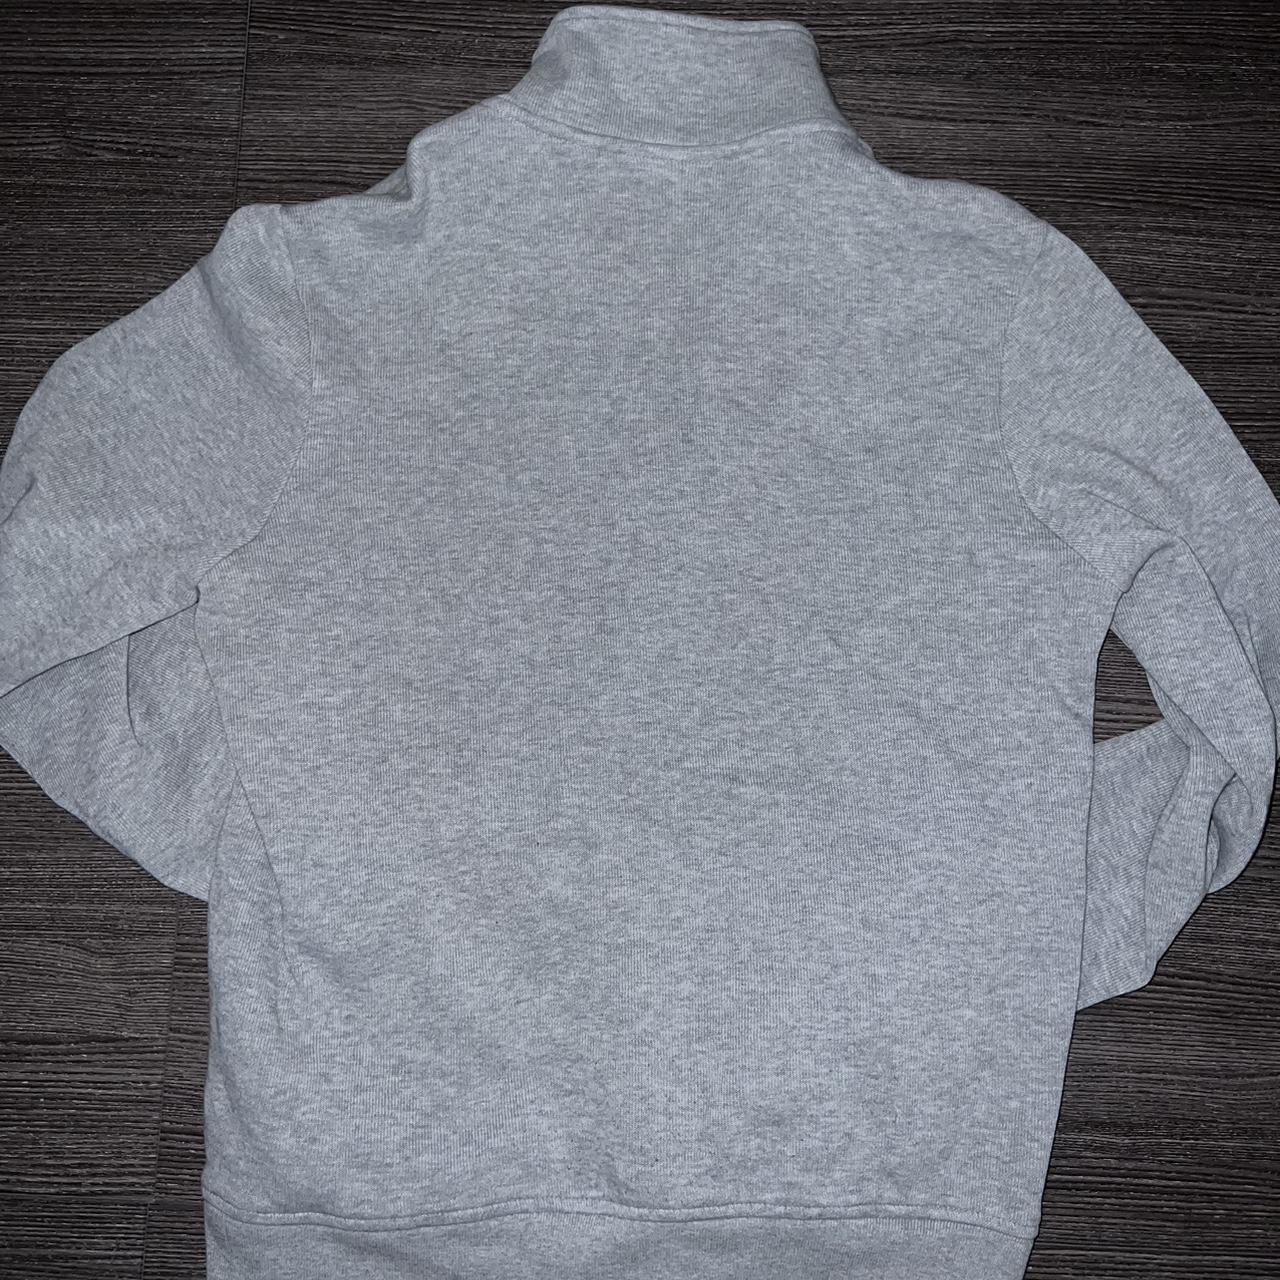 Lacoste Men's Grey and White Jumper (4)